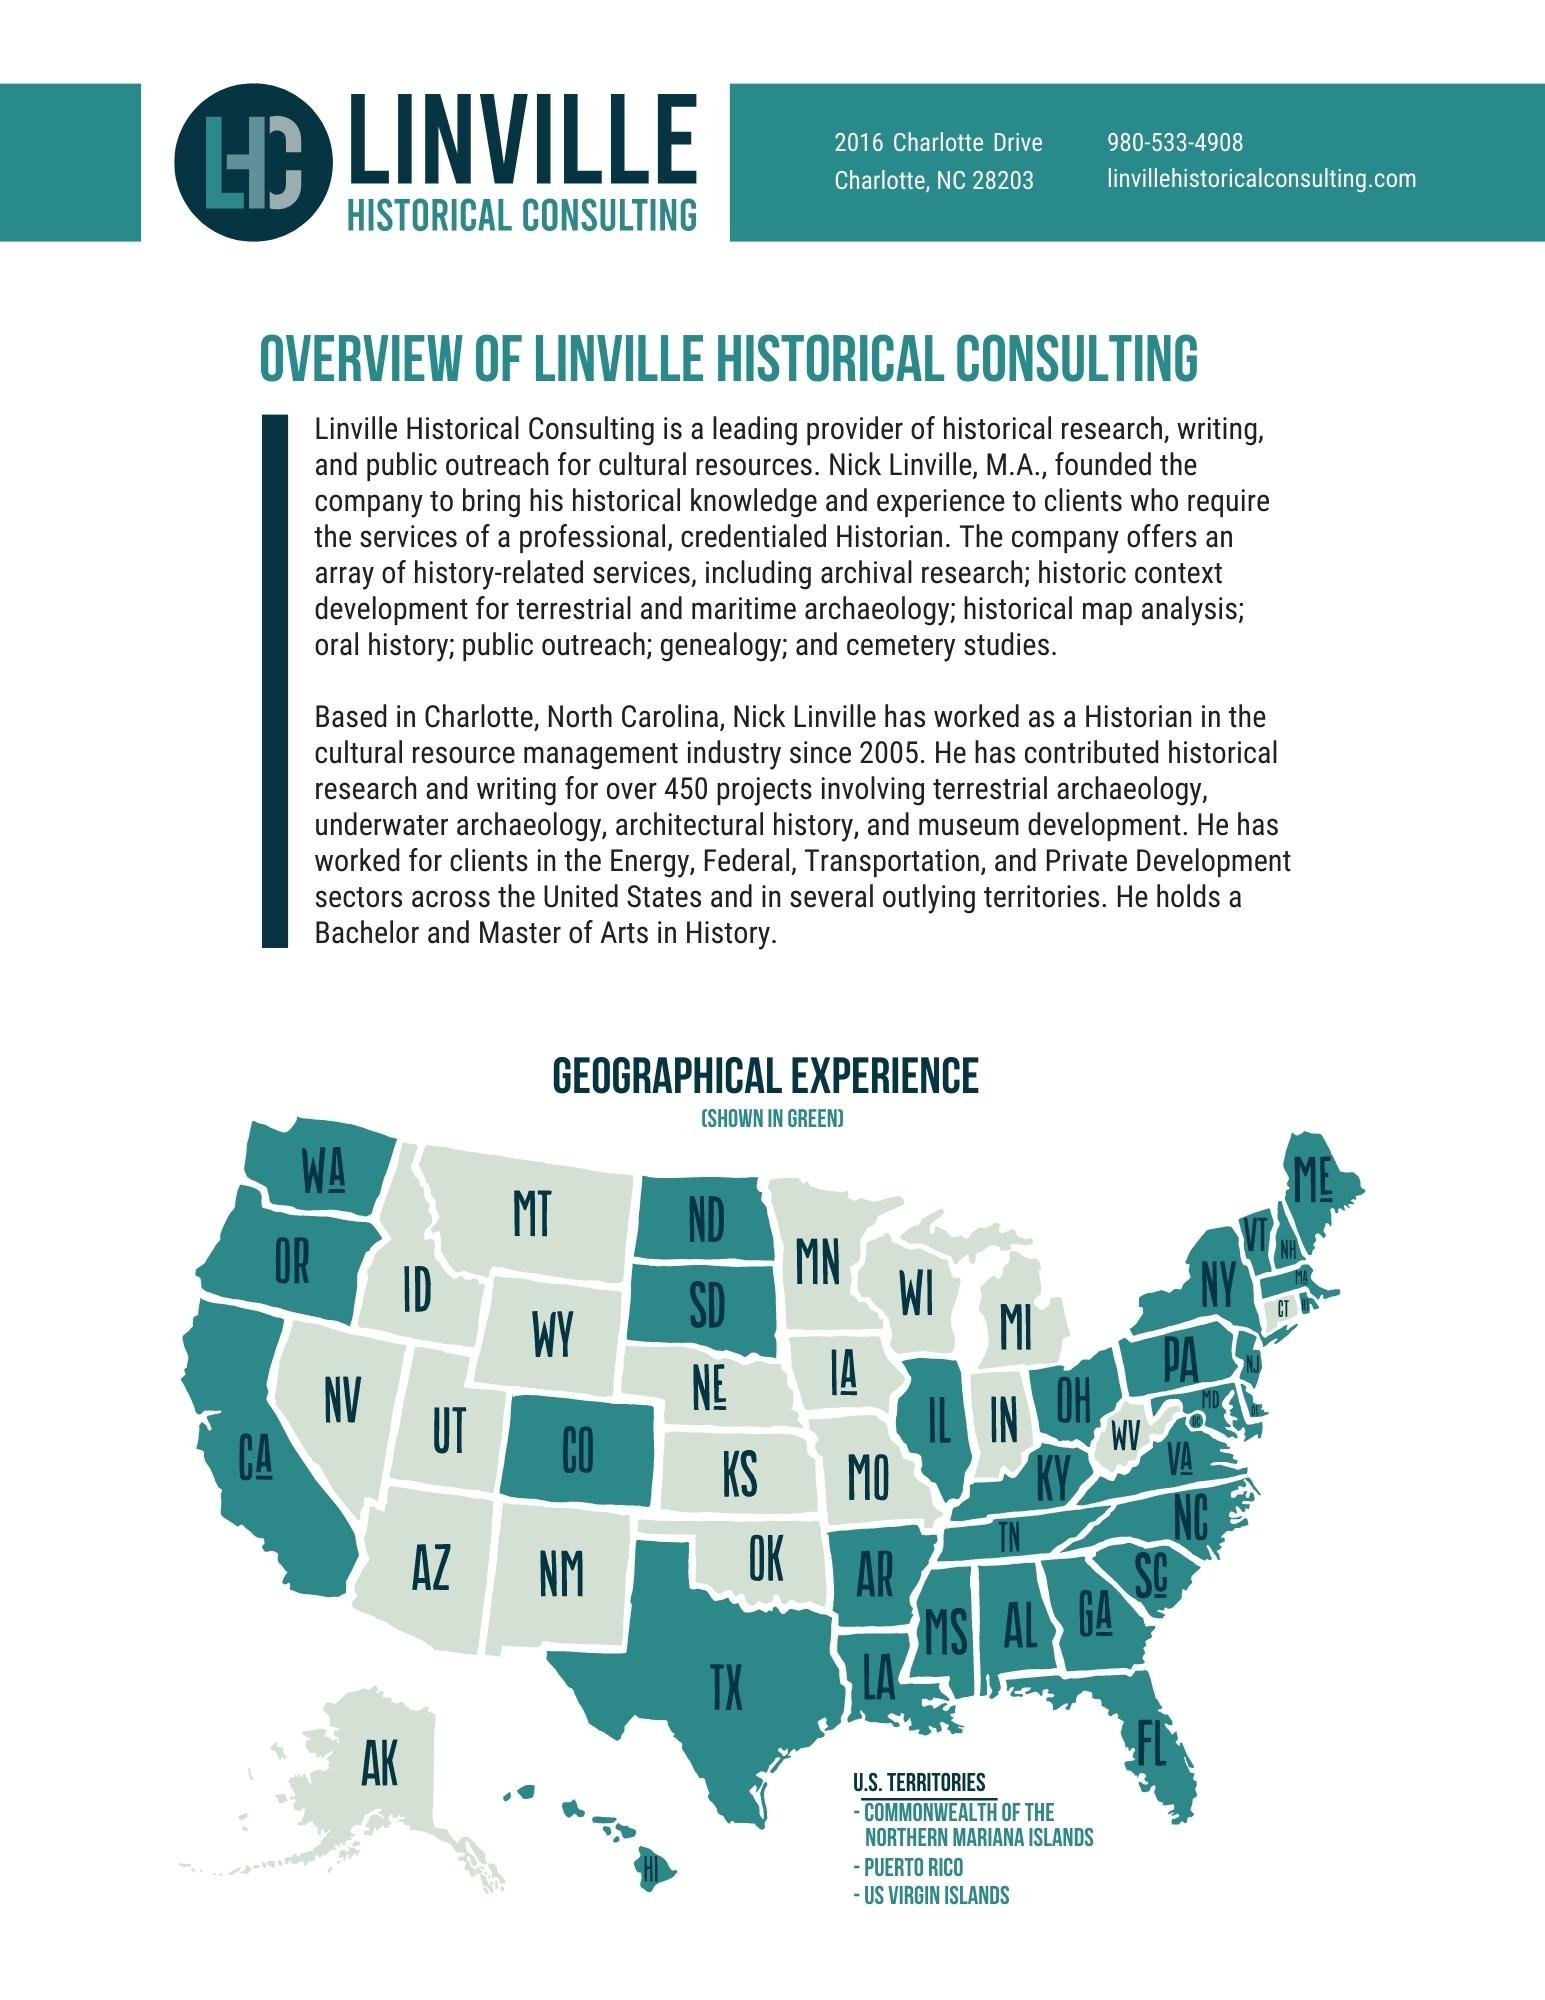 Linville Historical Consulting Overview.jpg